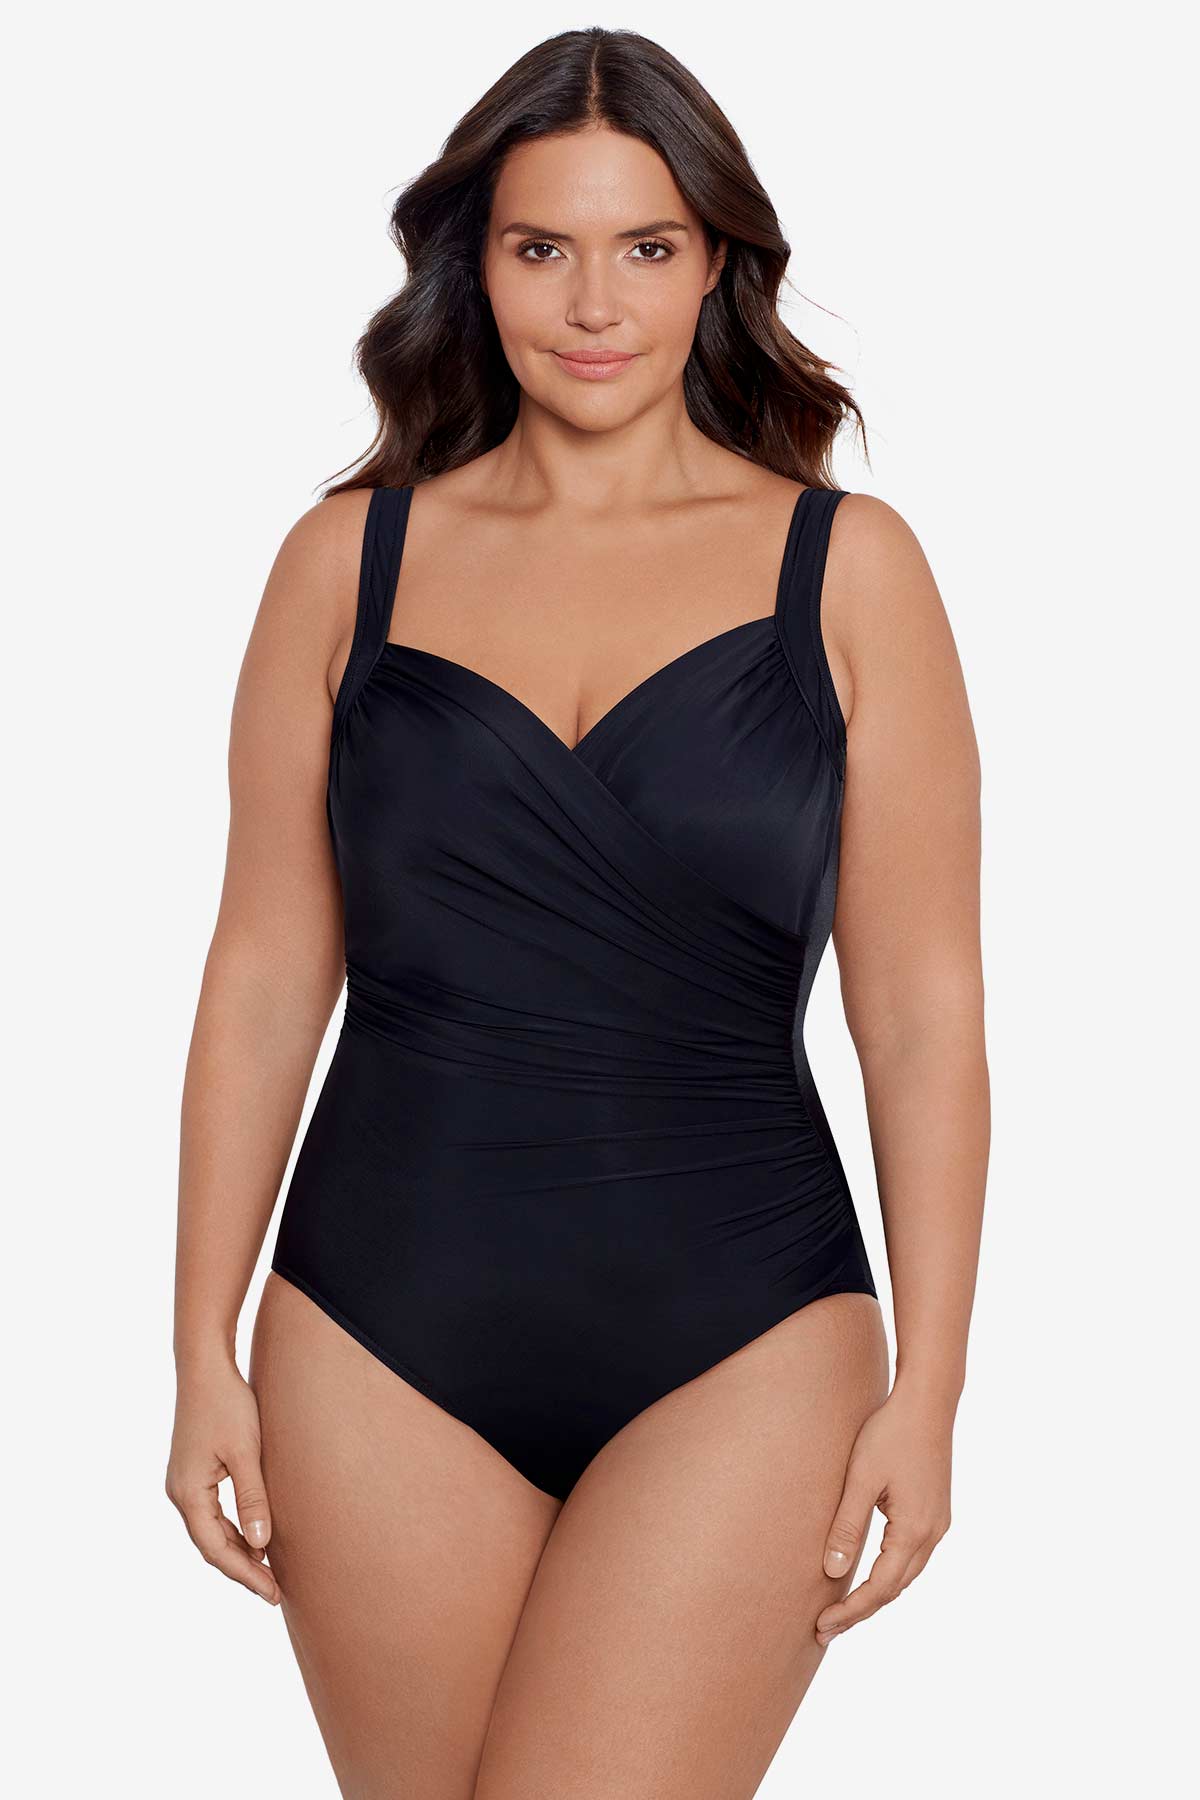 The Best Swimsuits for Older Women from Miraclesuit